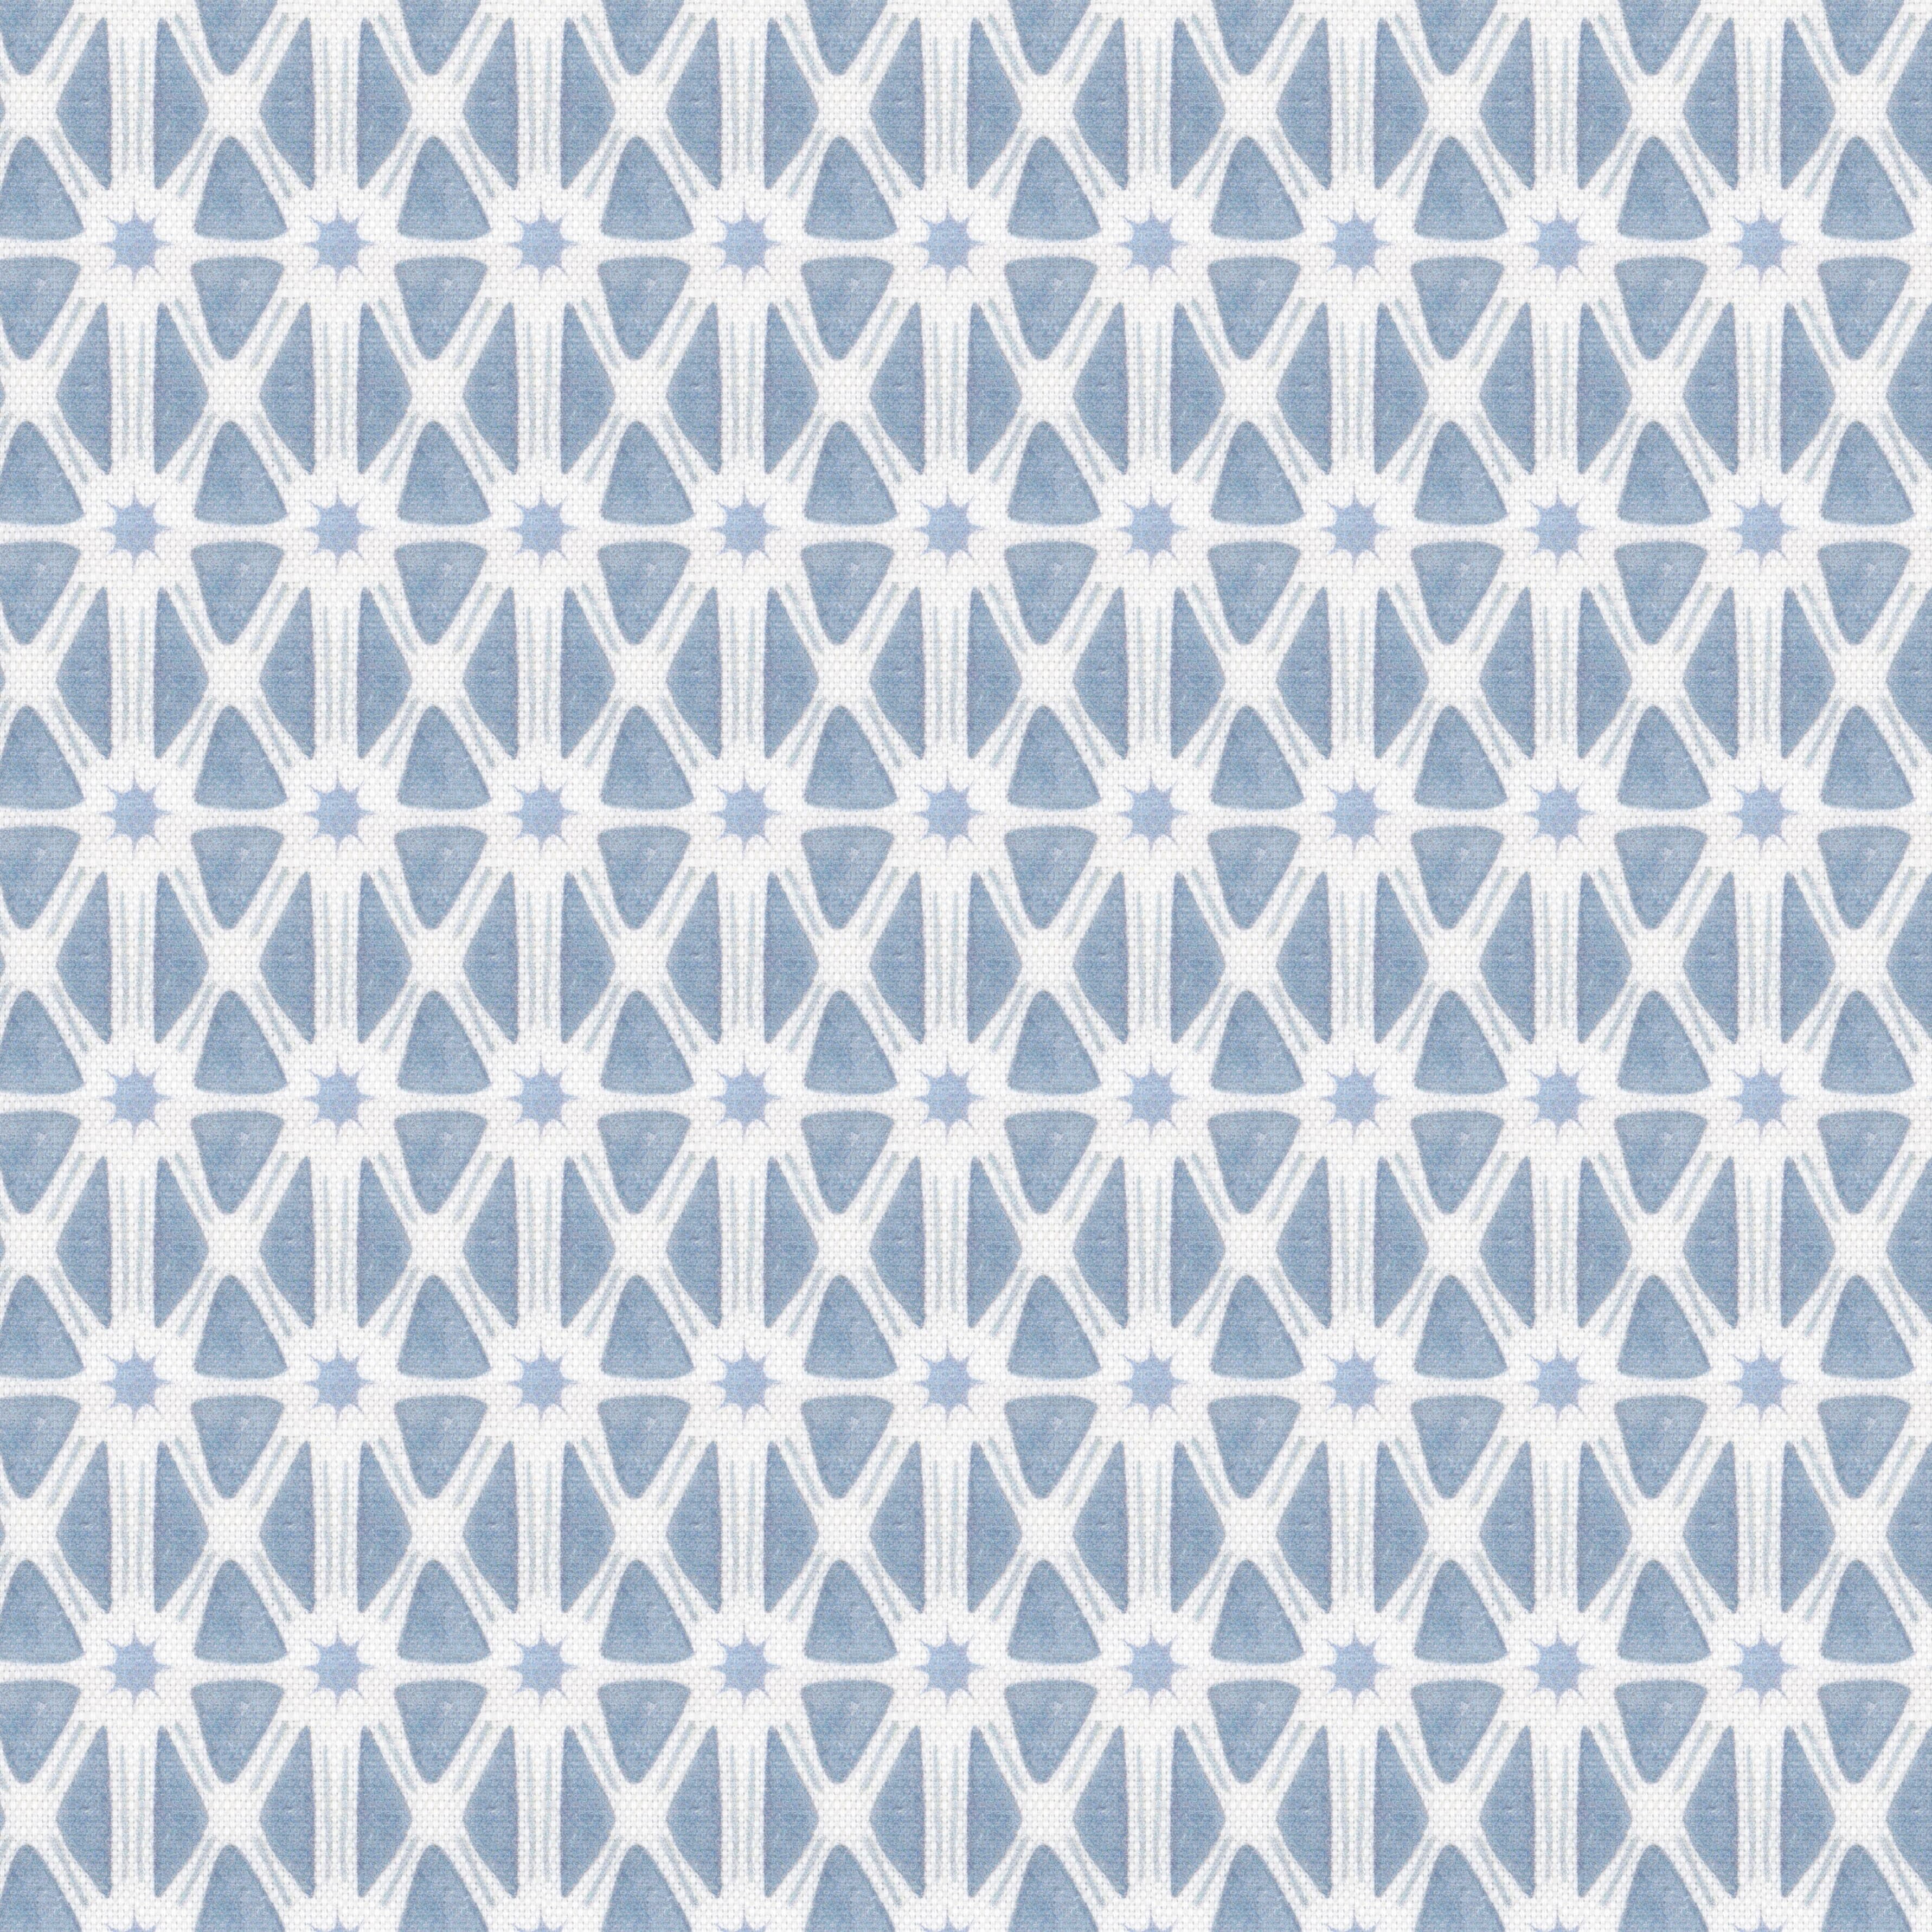 7847 Triangle Stars 2 Moonstone by Stout Fabric